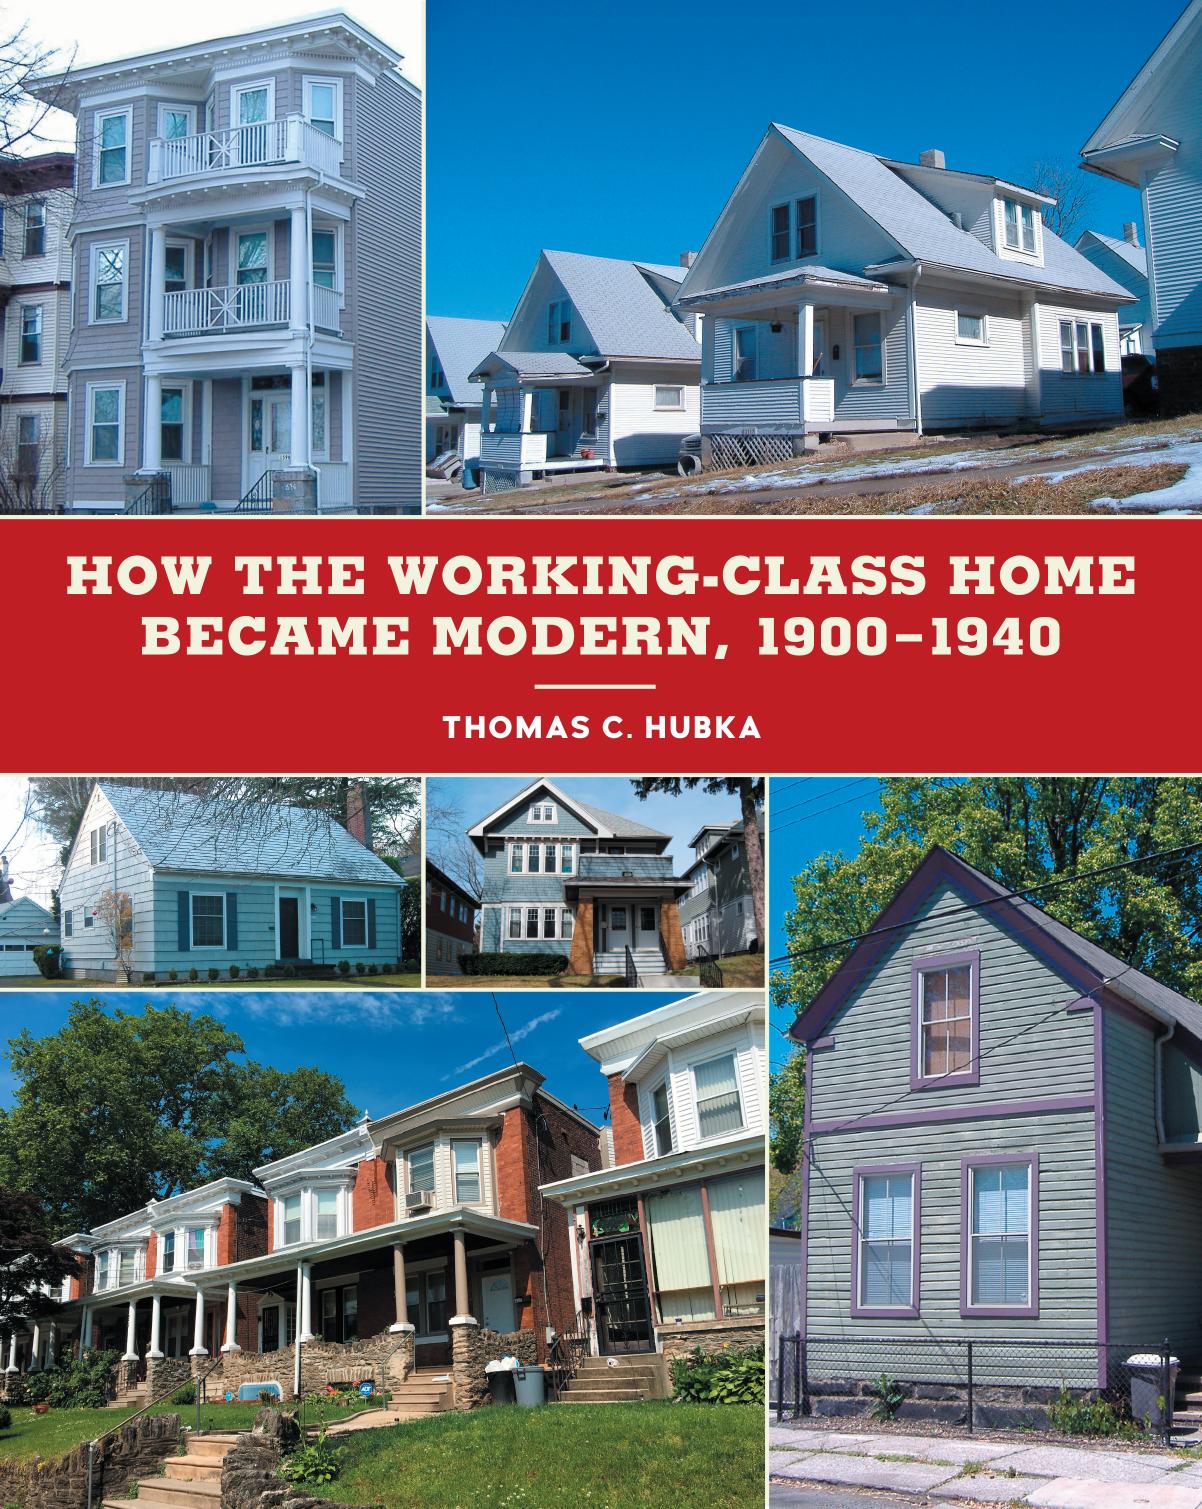 How the Working-Class Home Became Modern, 1900â1940 by Thomas C. Hubka